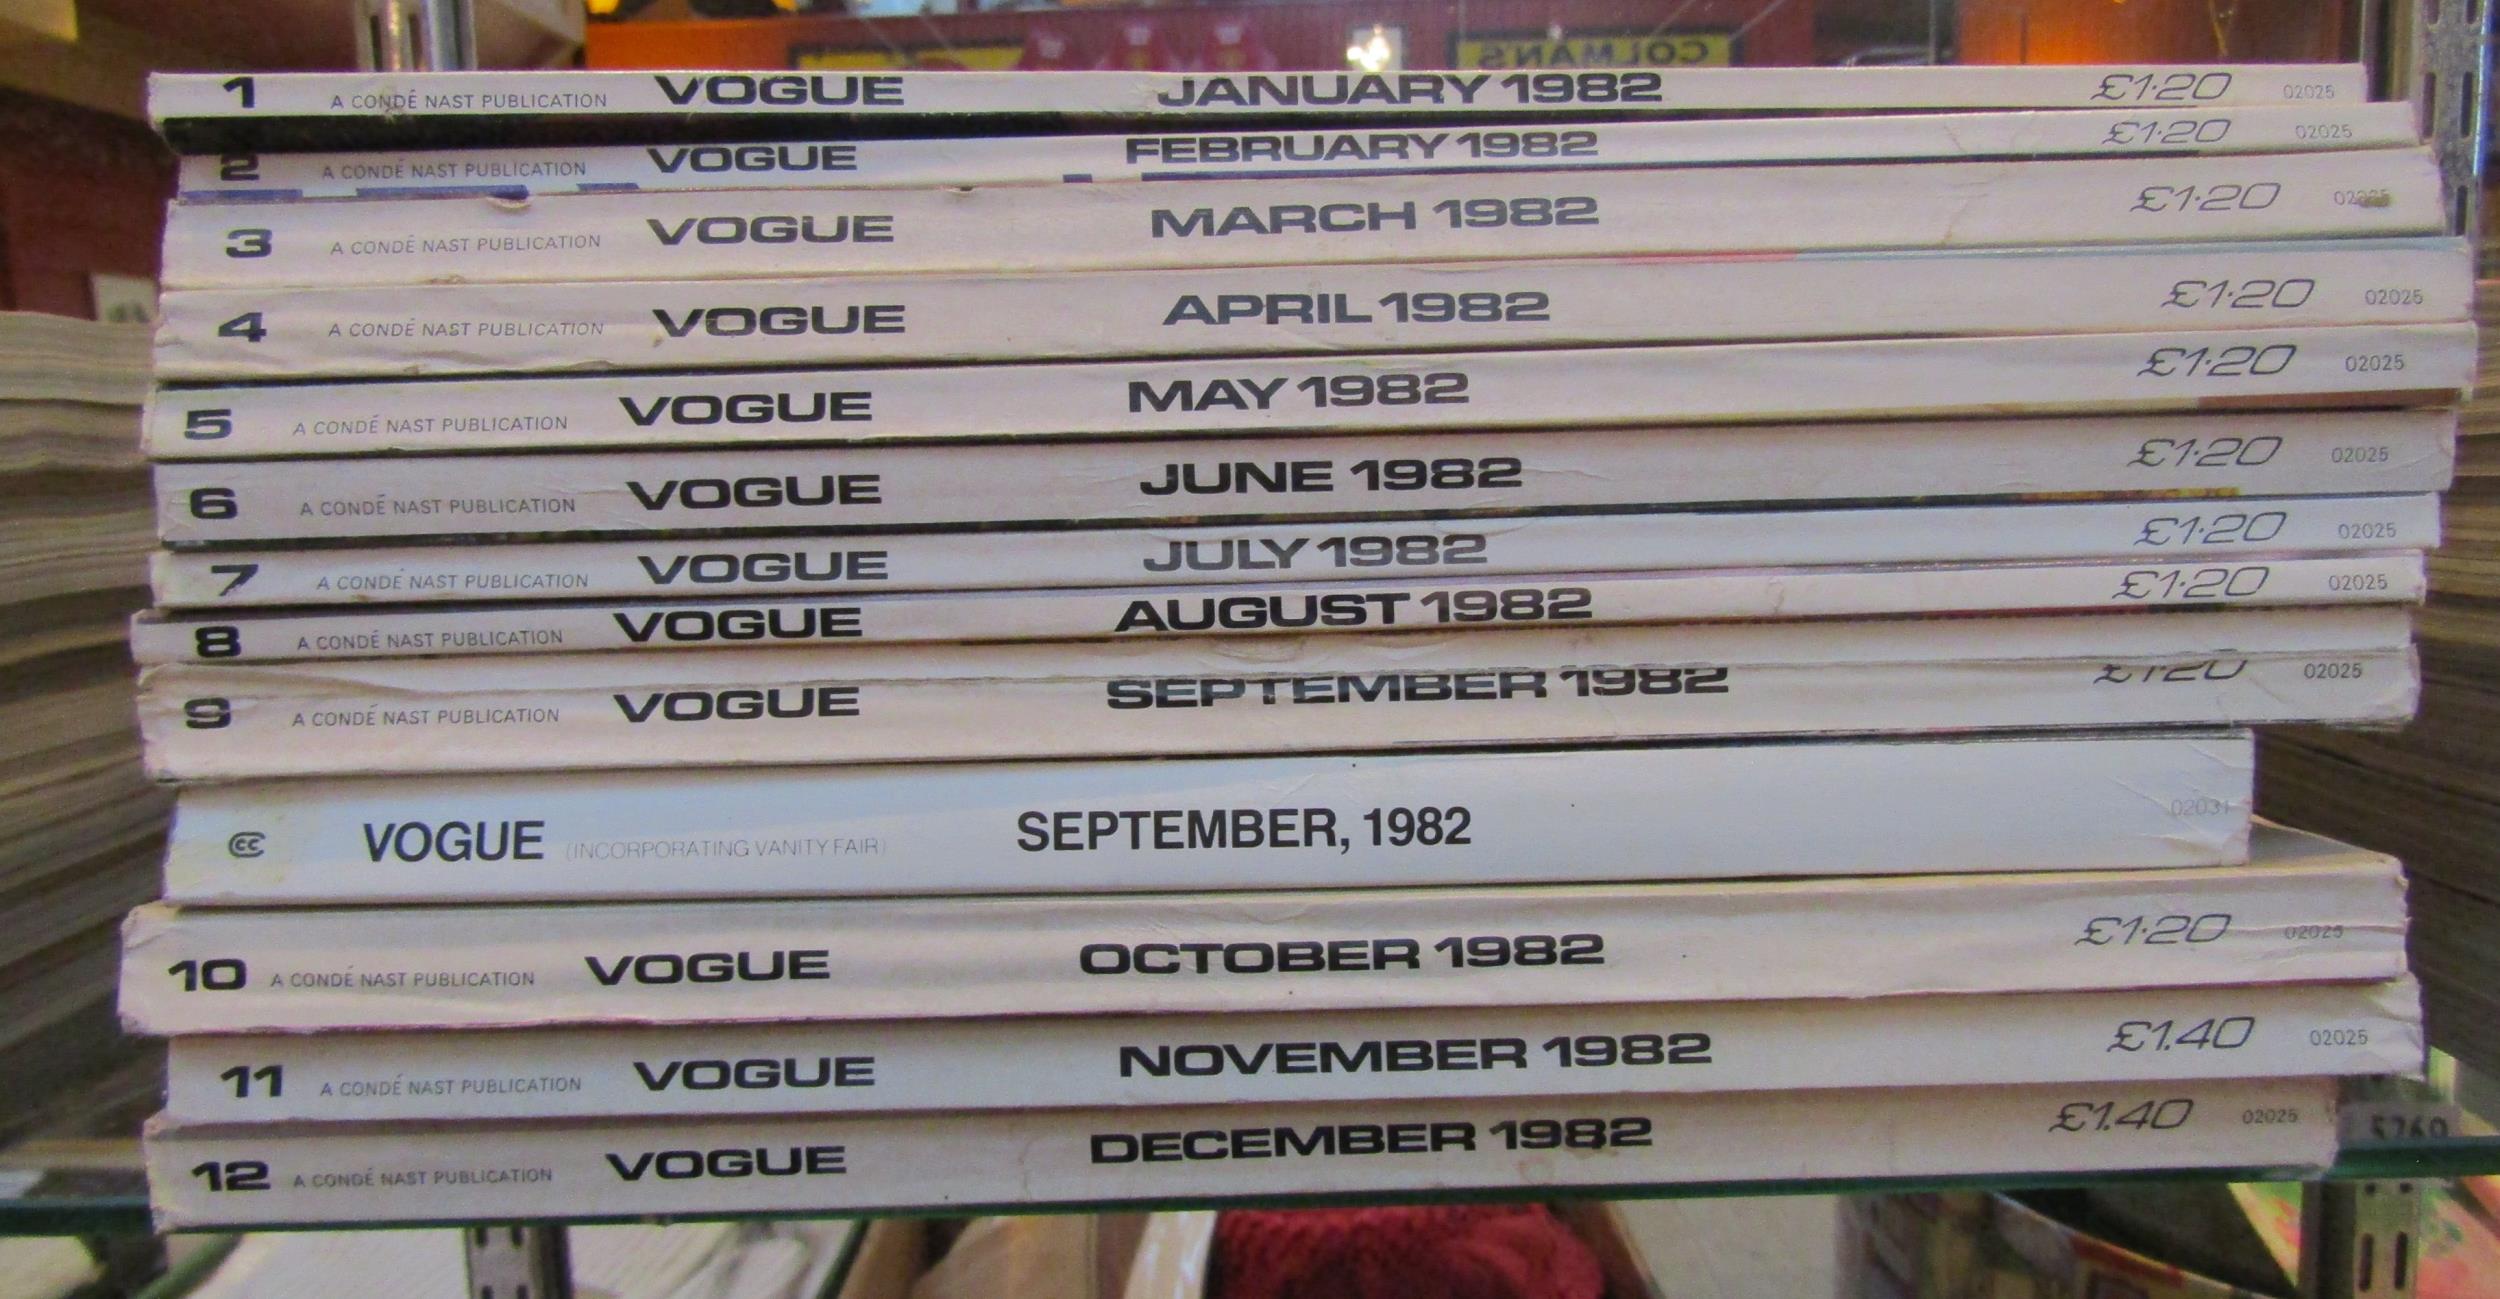 British Vogue magazine 1980 - January (1), February (2), March 1st (3), March 15th (4), April 1st ( - Image 4 of 40